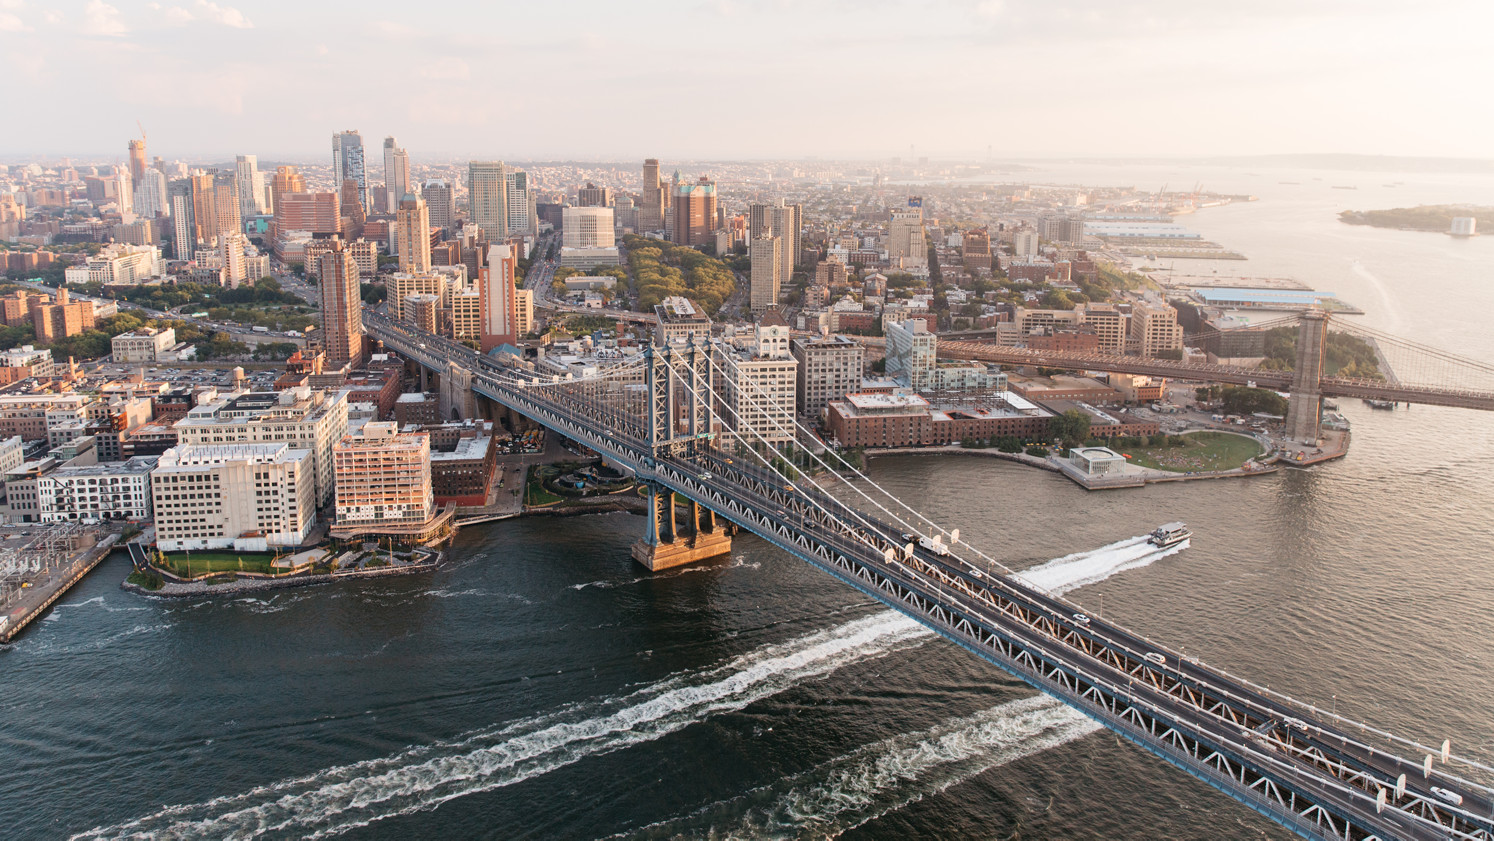 An aerial view of the New York skyline with the Brooklyn Bridge in the foreground.